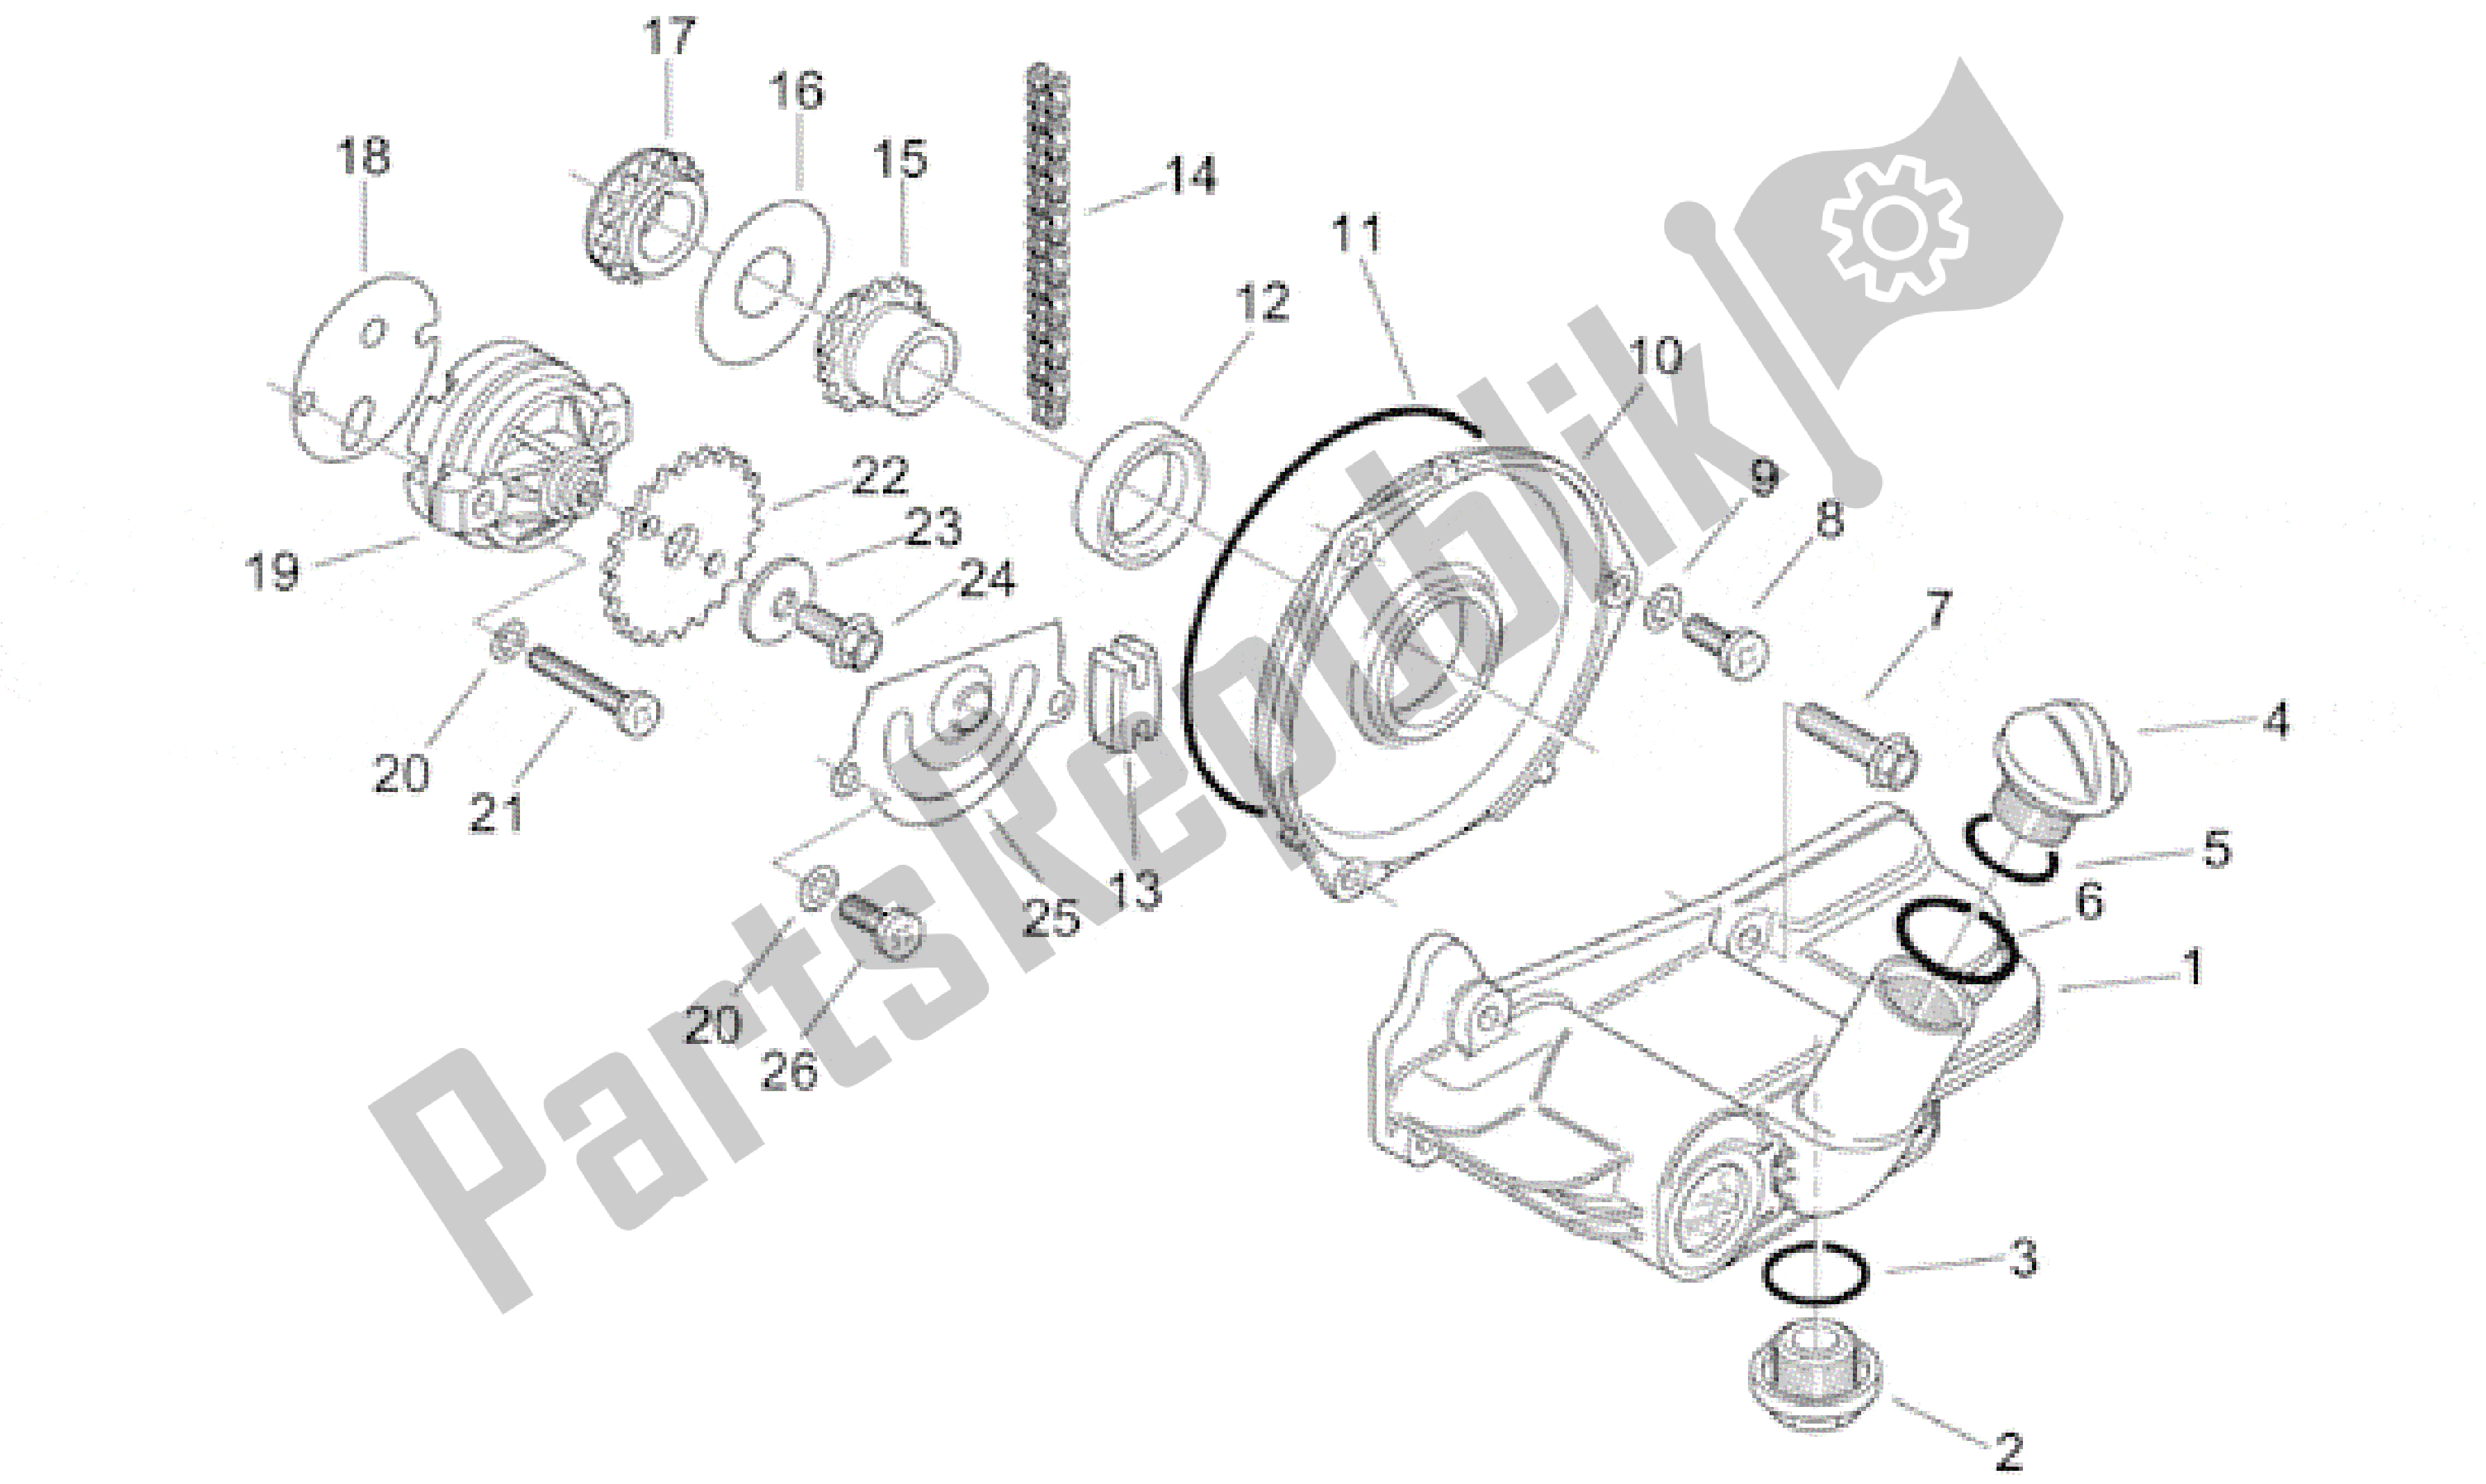 All parts for the Oil Pump of the Aprilia Habana 125 1999 - 2001